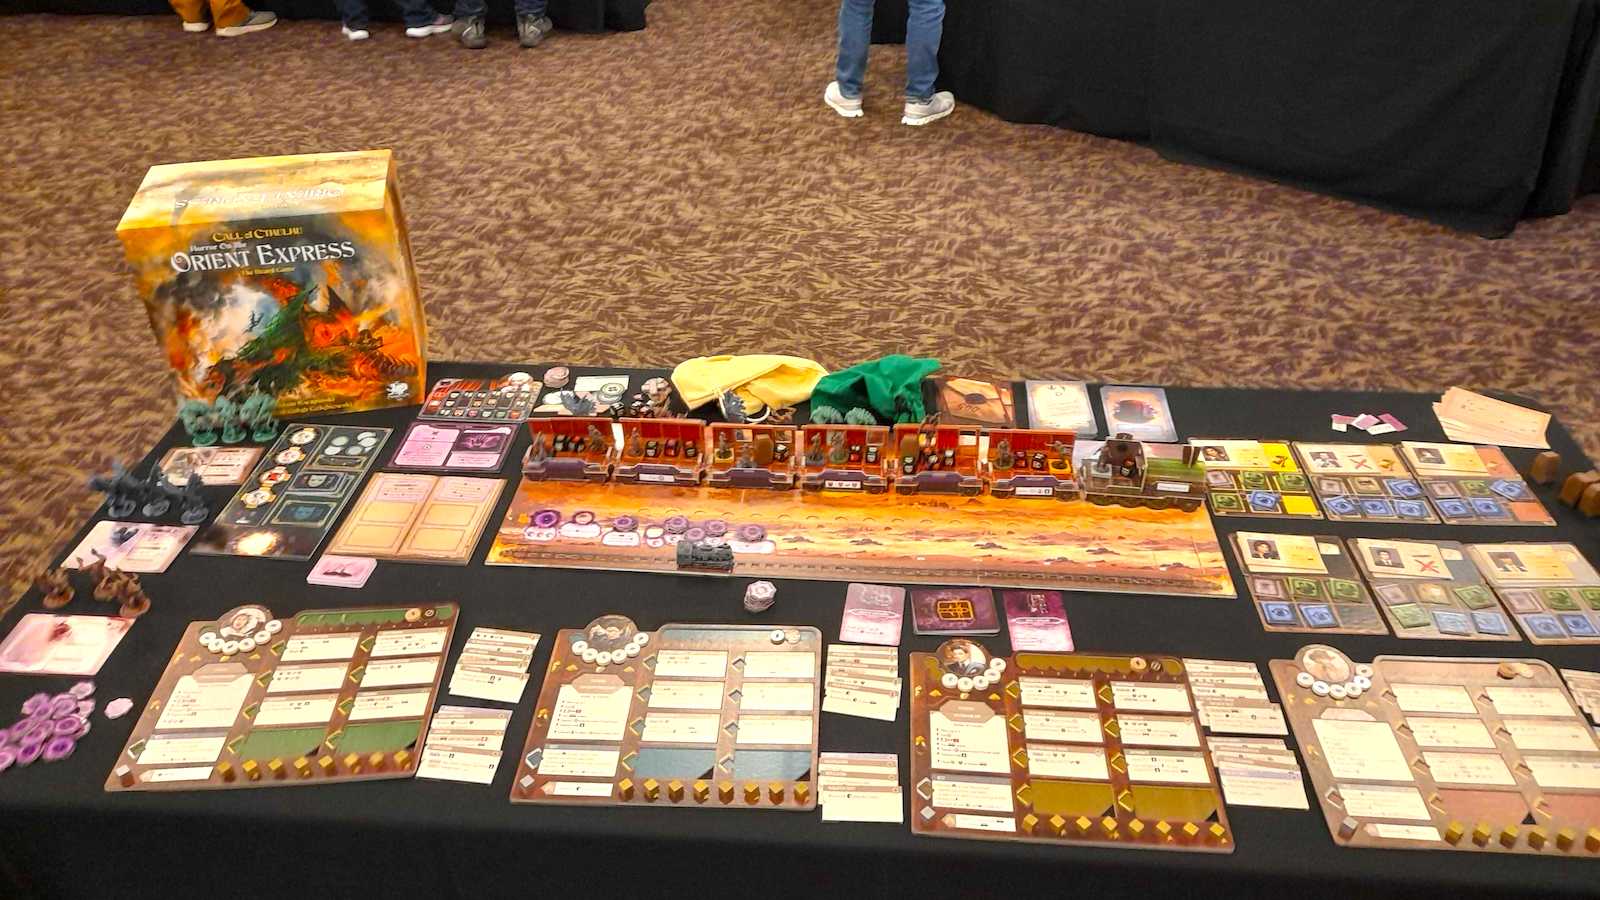 [Chaosium] Chaosium Con Australia Update: Play Horror on the Orient Express the Board Game at Chaosium Con Australia in June